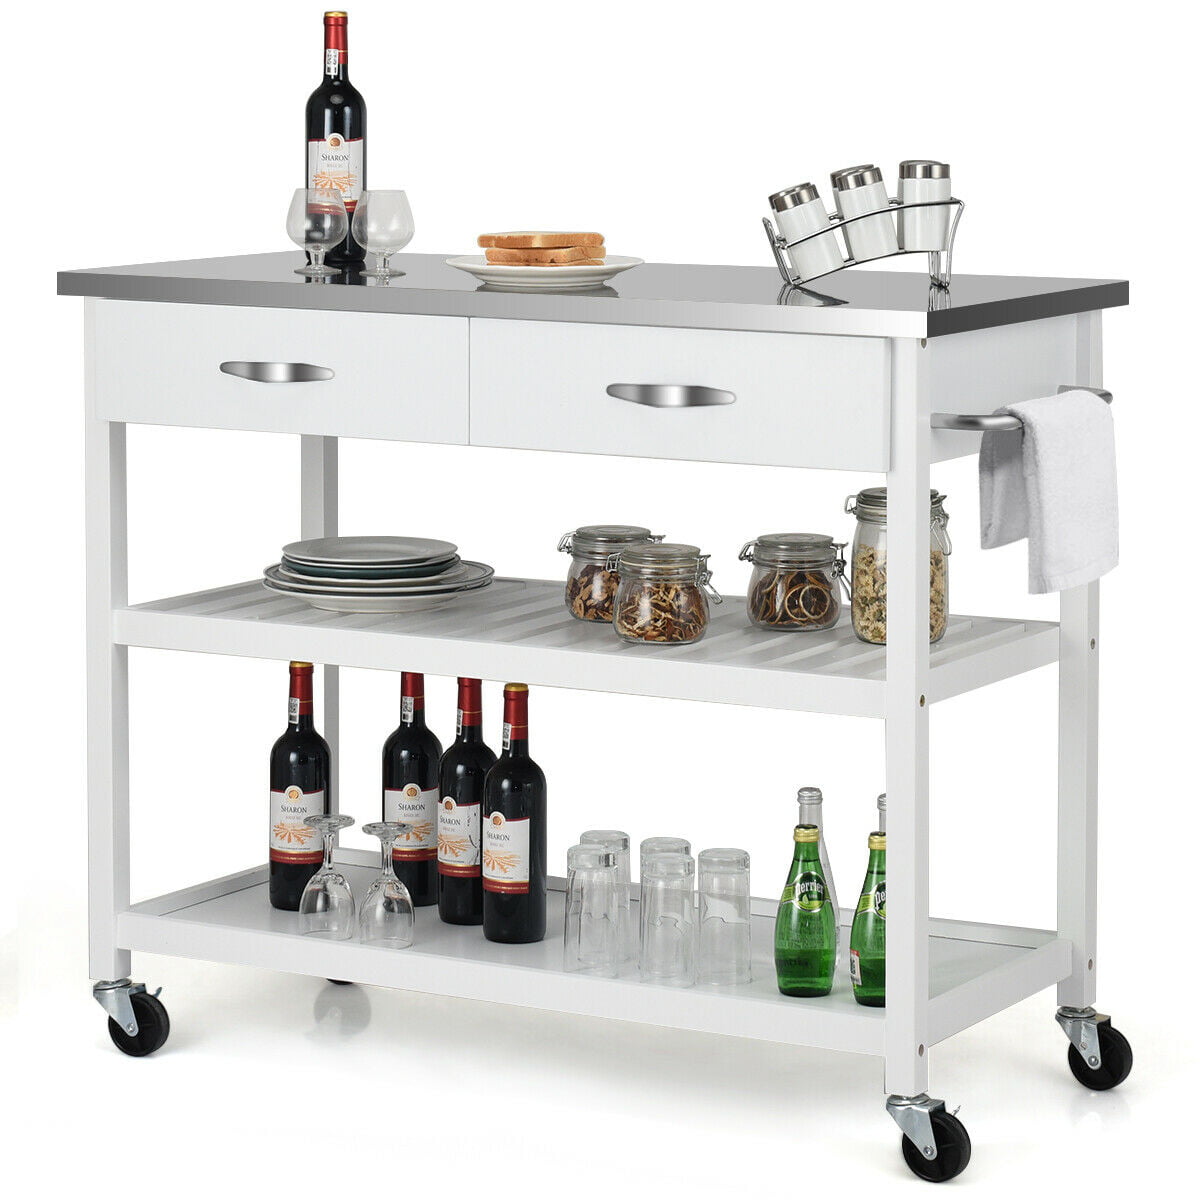 Costway Rolling Kitchen Trolley Cart Island Stainless Steel Countertop Stainless Steel Kitchen Rolling Cart